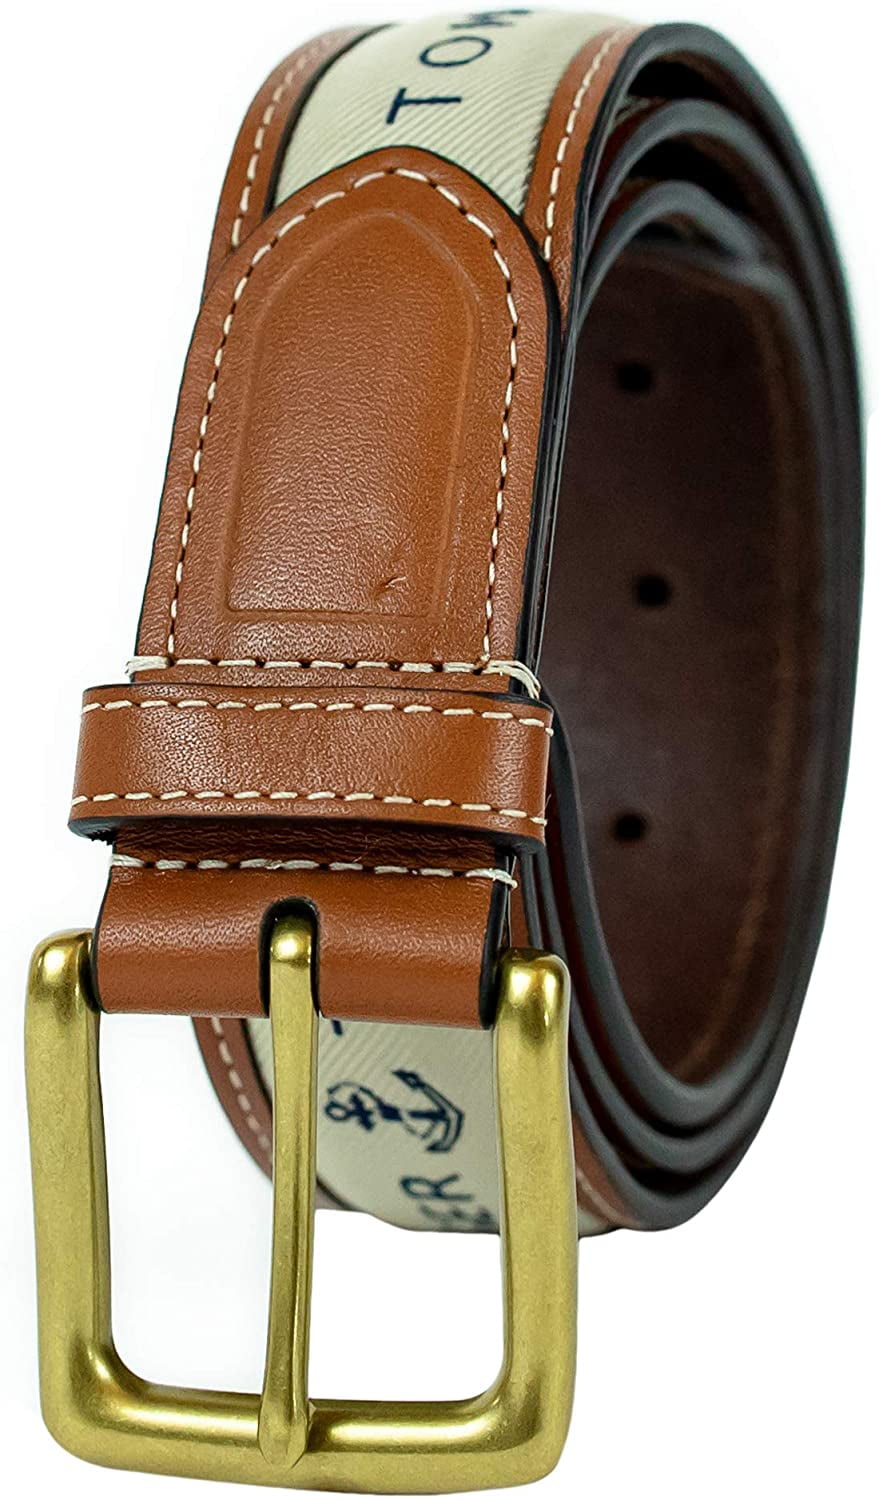 Tommy Hilfiger 42 Mens Leather with Fabric Inlay Casual Belt, Khaki Walmart.com